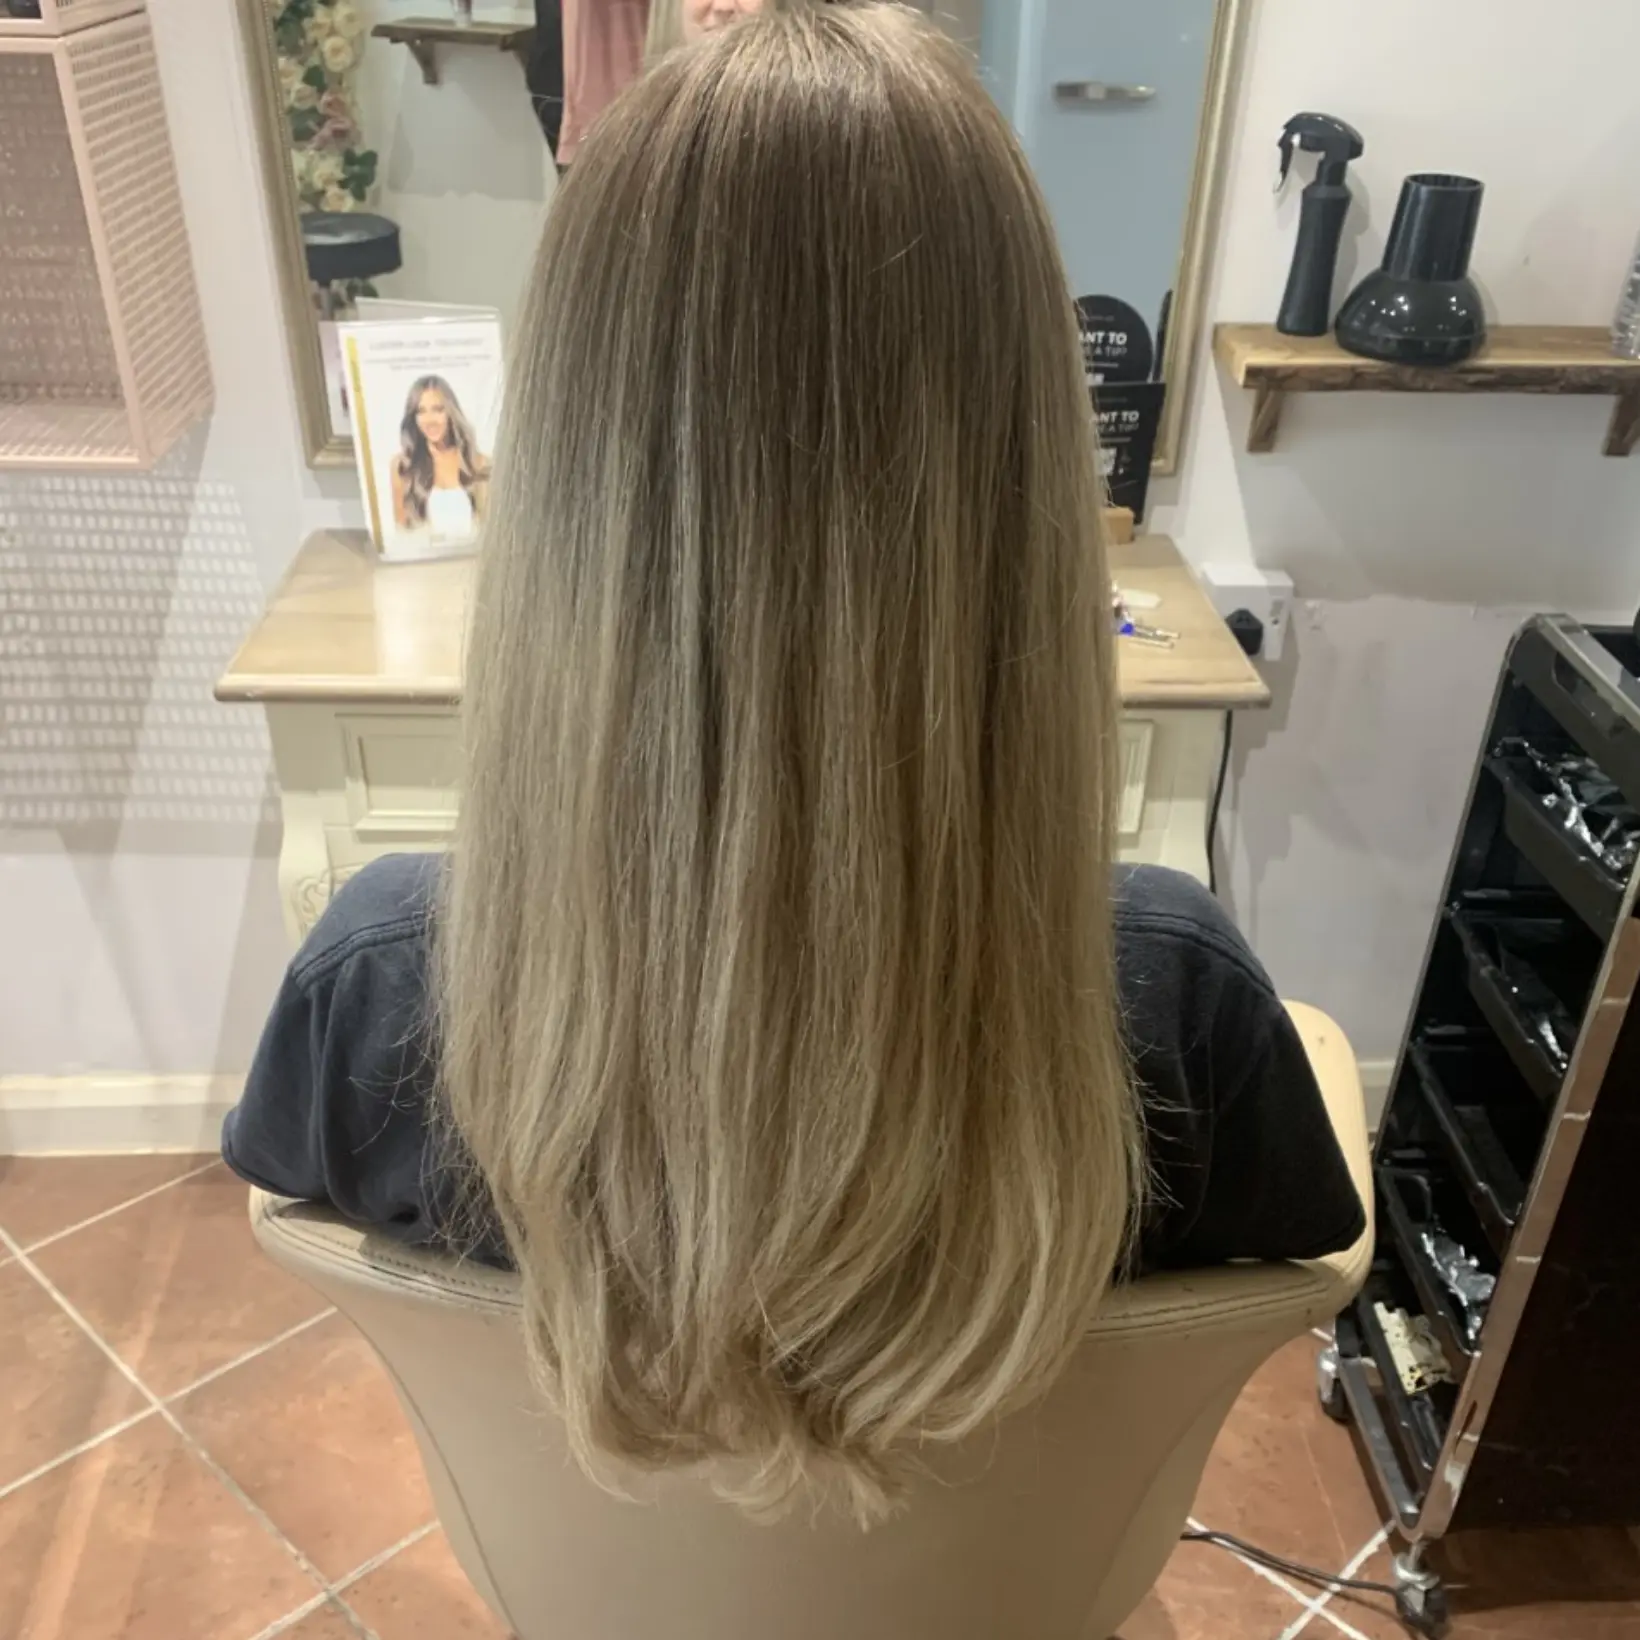 Can I Switch From Highlights to Balayage?